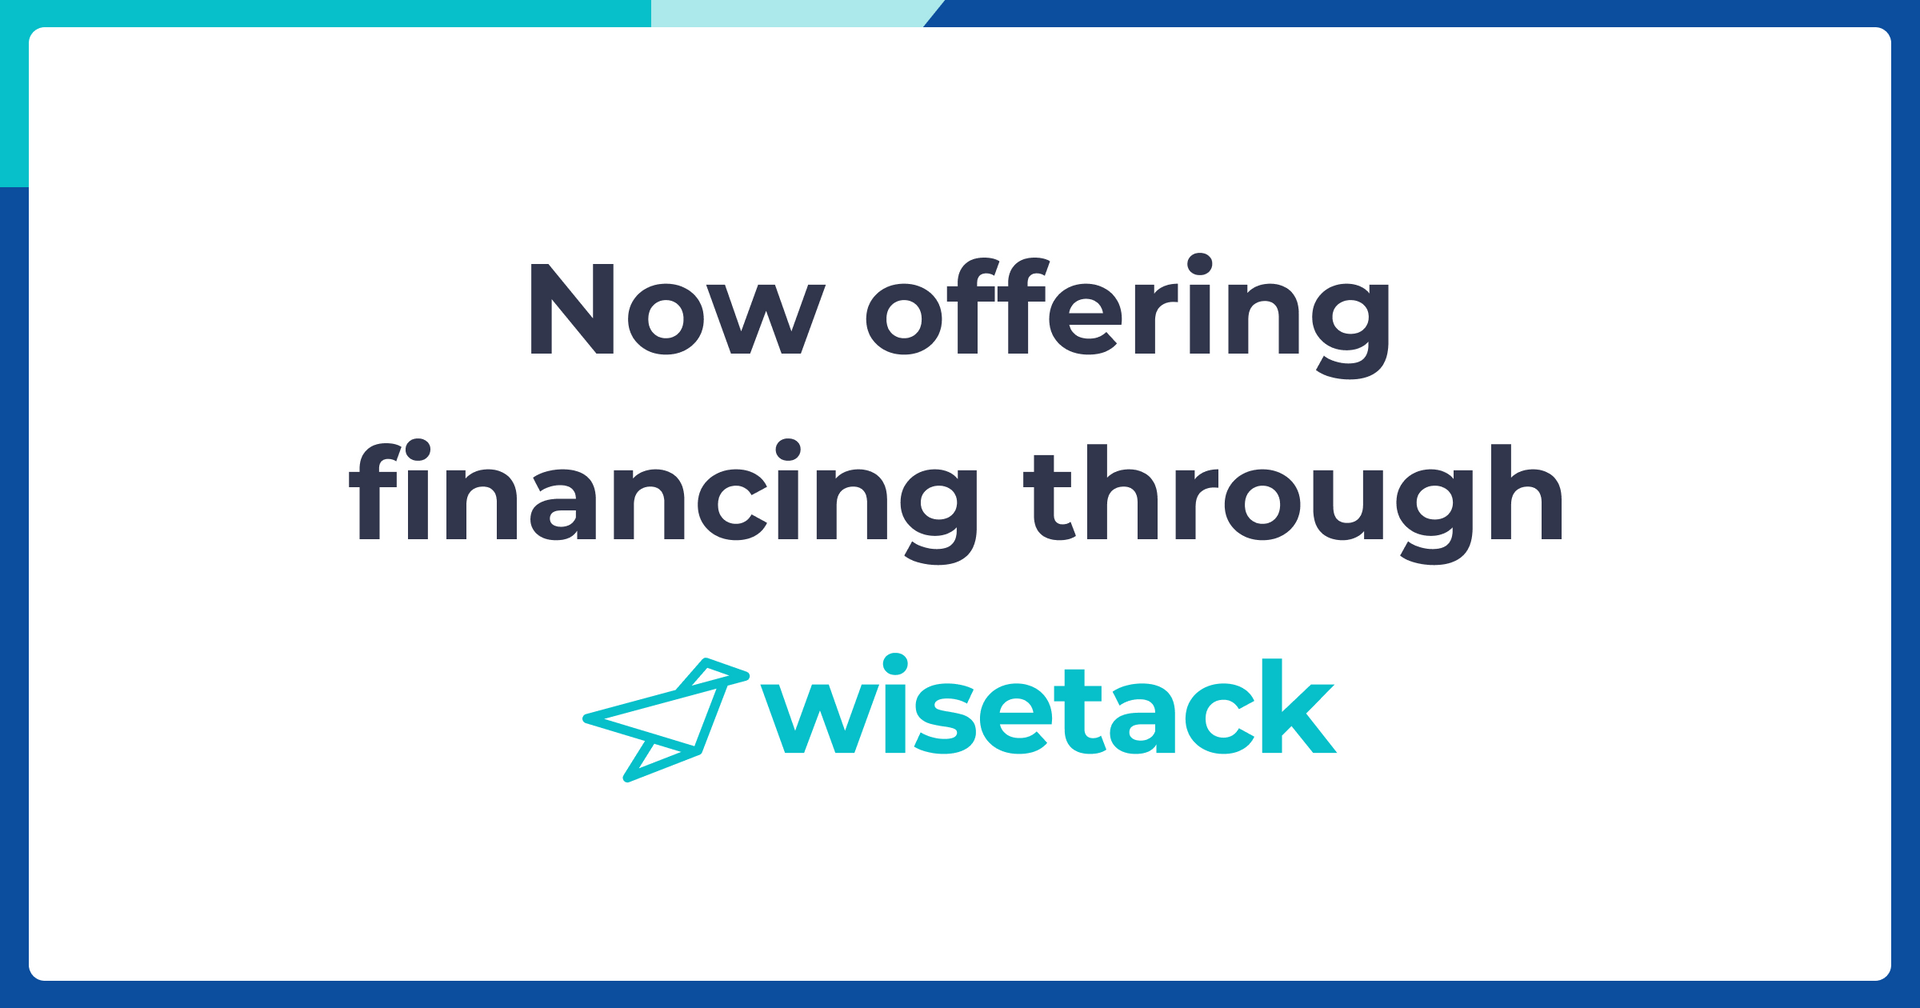 Cut Twice Woodworks is now offering financing through wise tack.